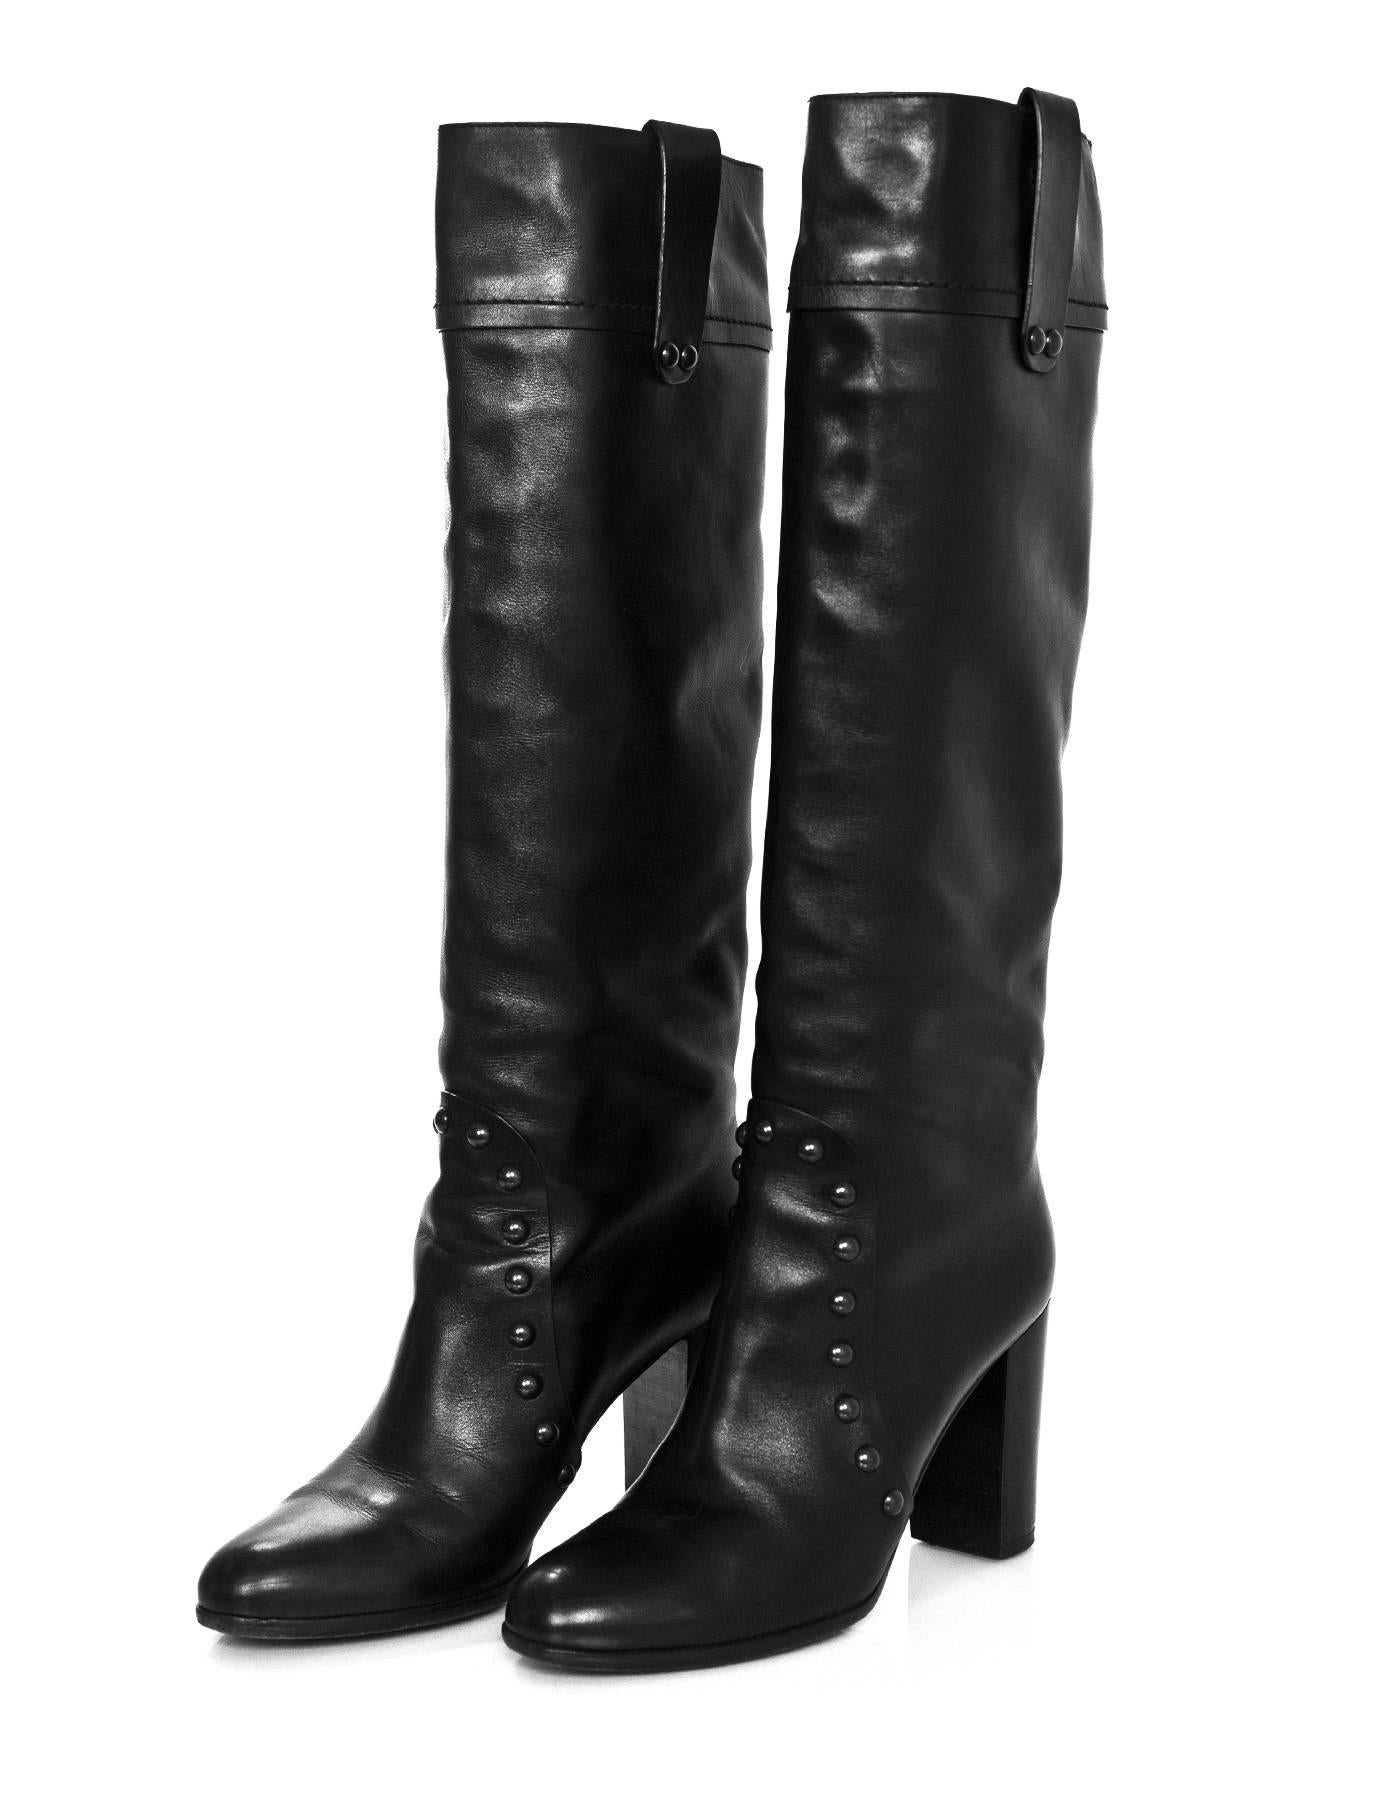 Sergio Rossi Black Leather Studded Boots Sz 38.5

Made In: Italy
Color: Black
Materials: Leather
Closure/Opening: Pull up
Sole Stamp: Sergio Rossi Vero Cuoio Made in Italy 38 1/2
Overall Condition: Excellent pre-owned condition with the exception of